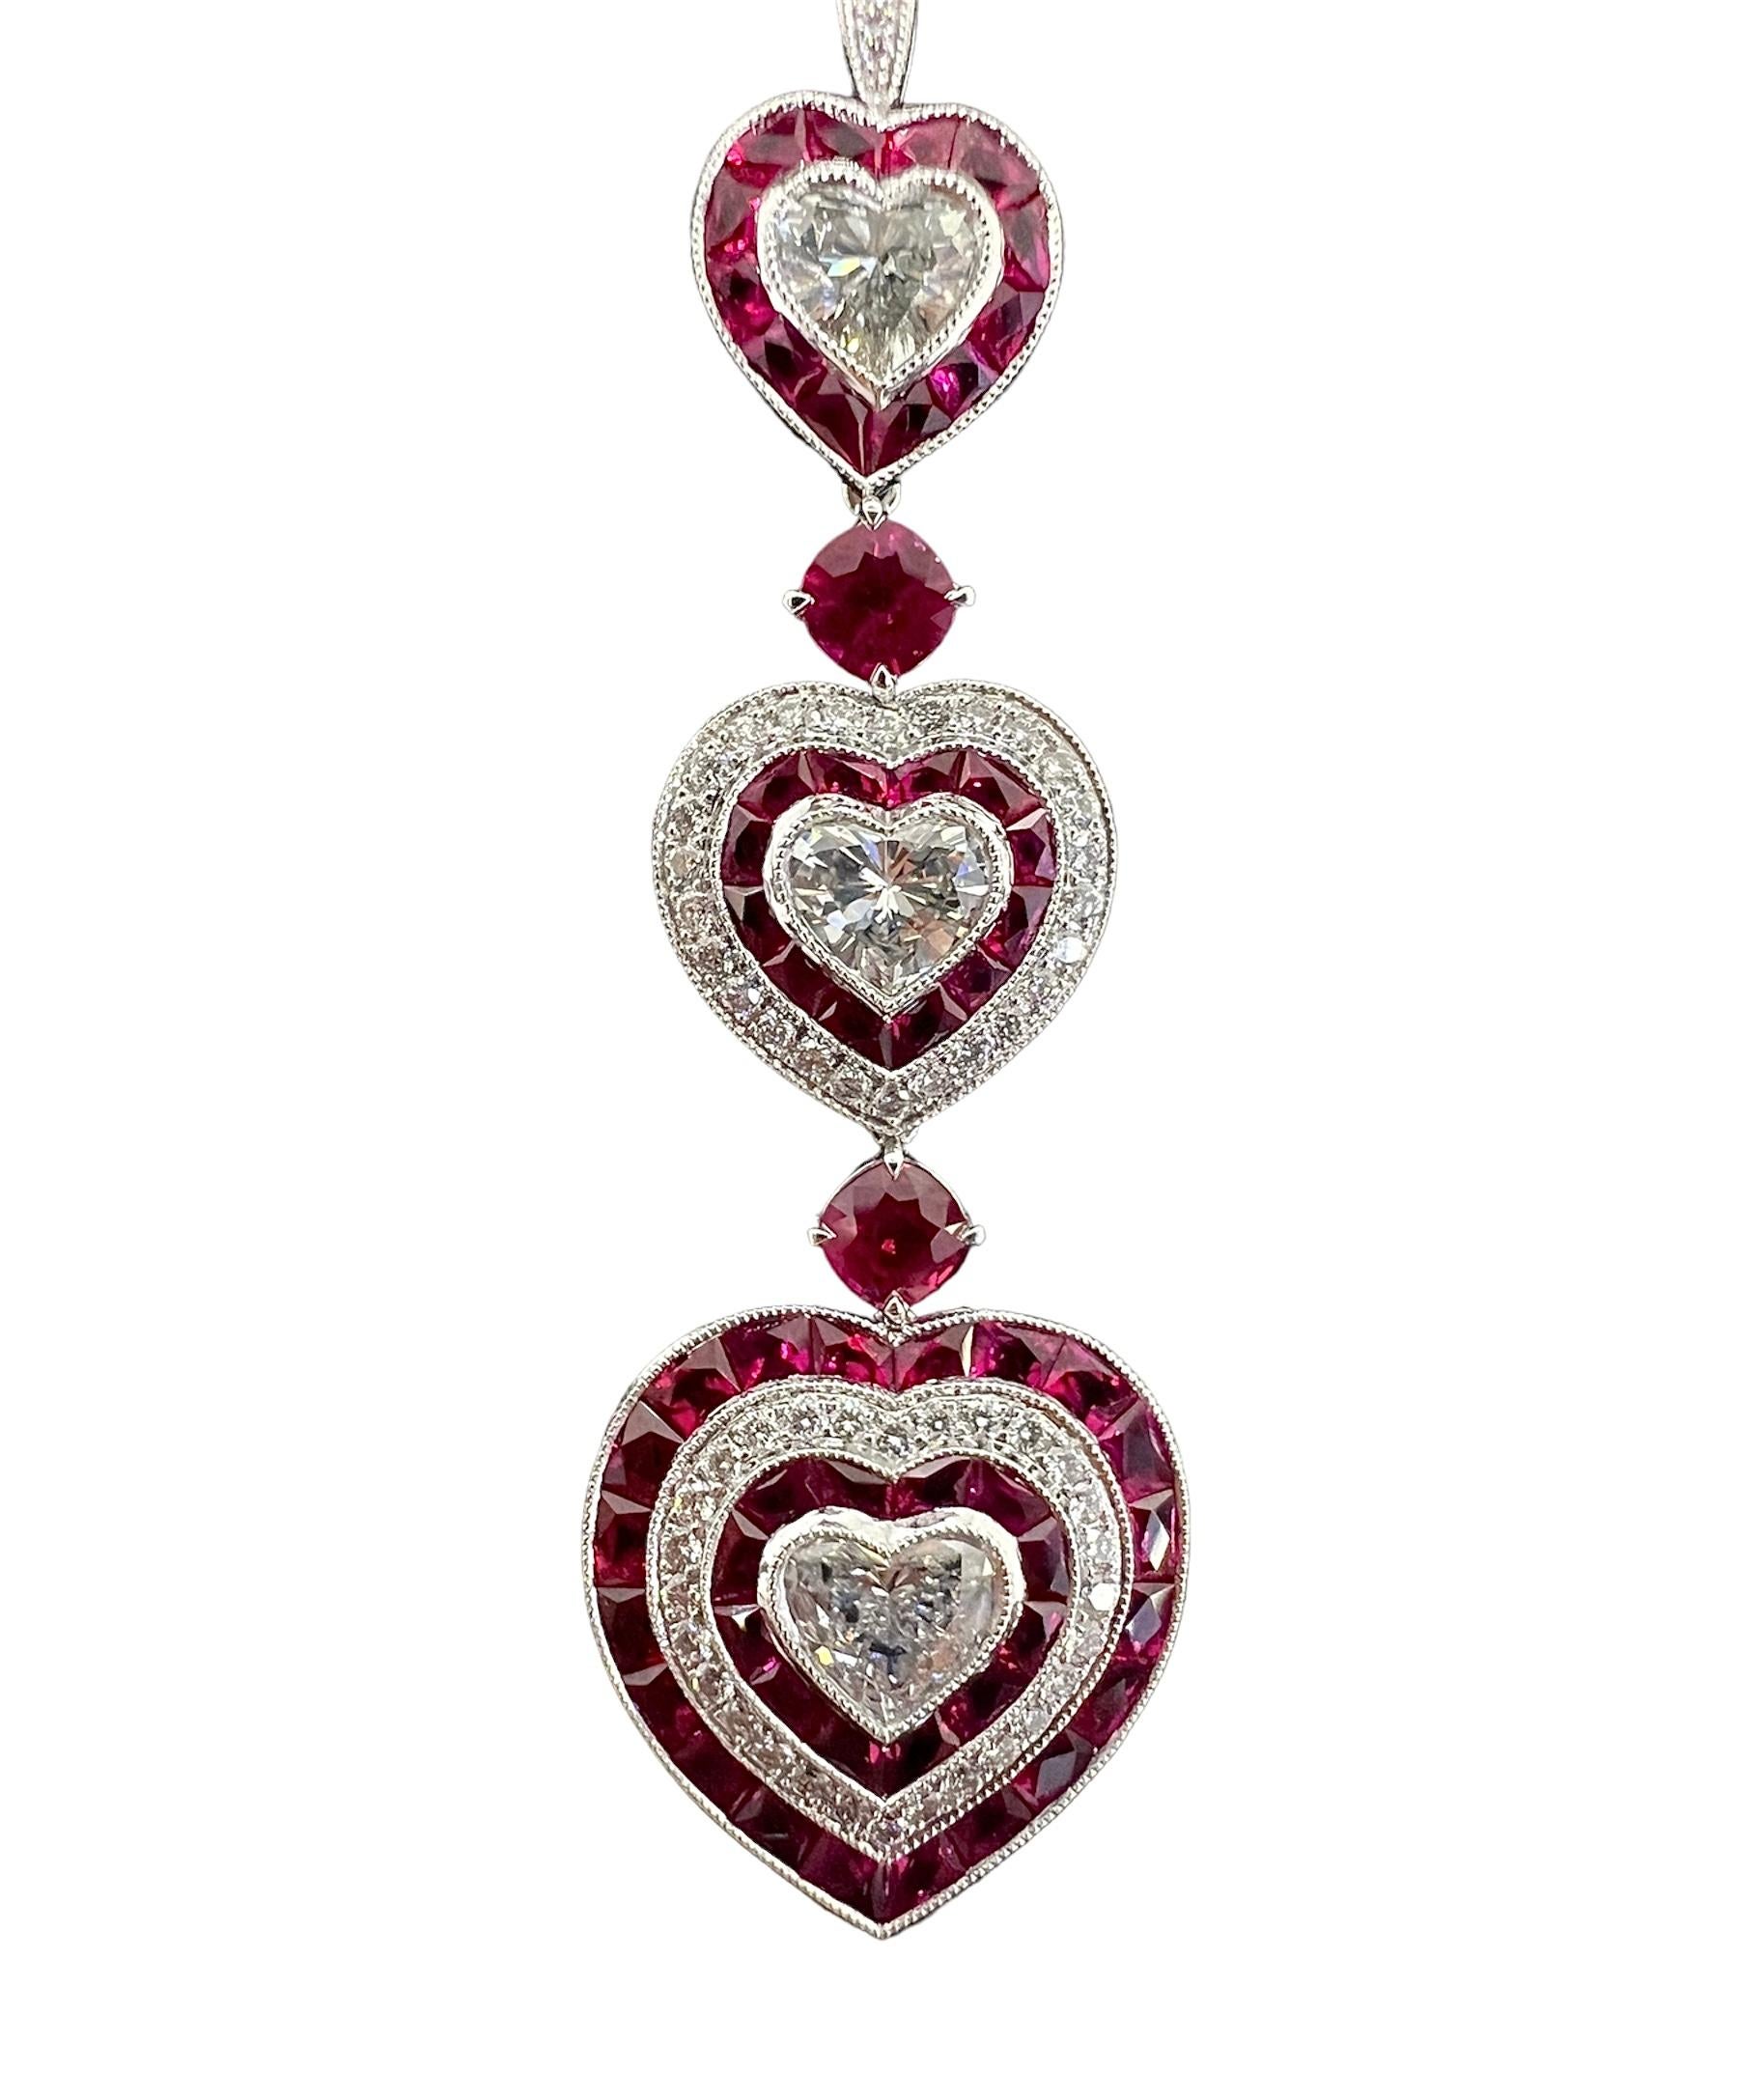 A platinum pendant necklace with 1.49 carat heart shaped cut diamond accentuated with 0.46 carat of round diamonds and 0.73 and 3.12 carat of rubies.

Sophia D by Joseph Dardashti LTD has been known worldwide for 35 years and are inspired by classic